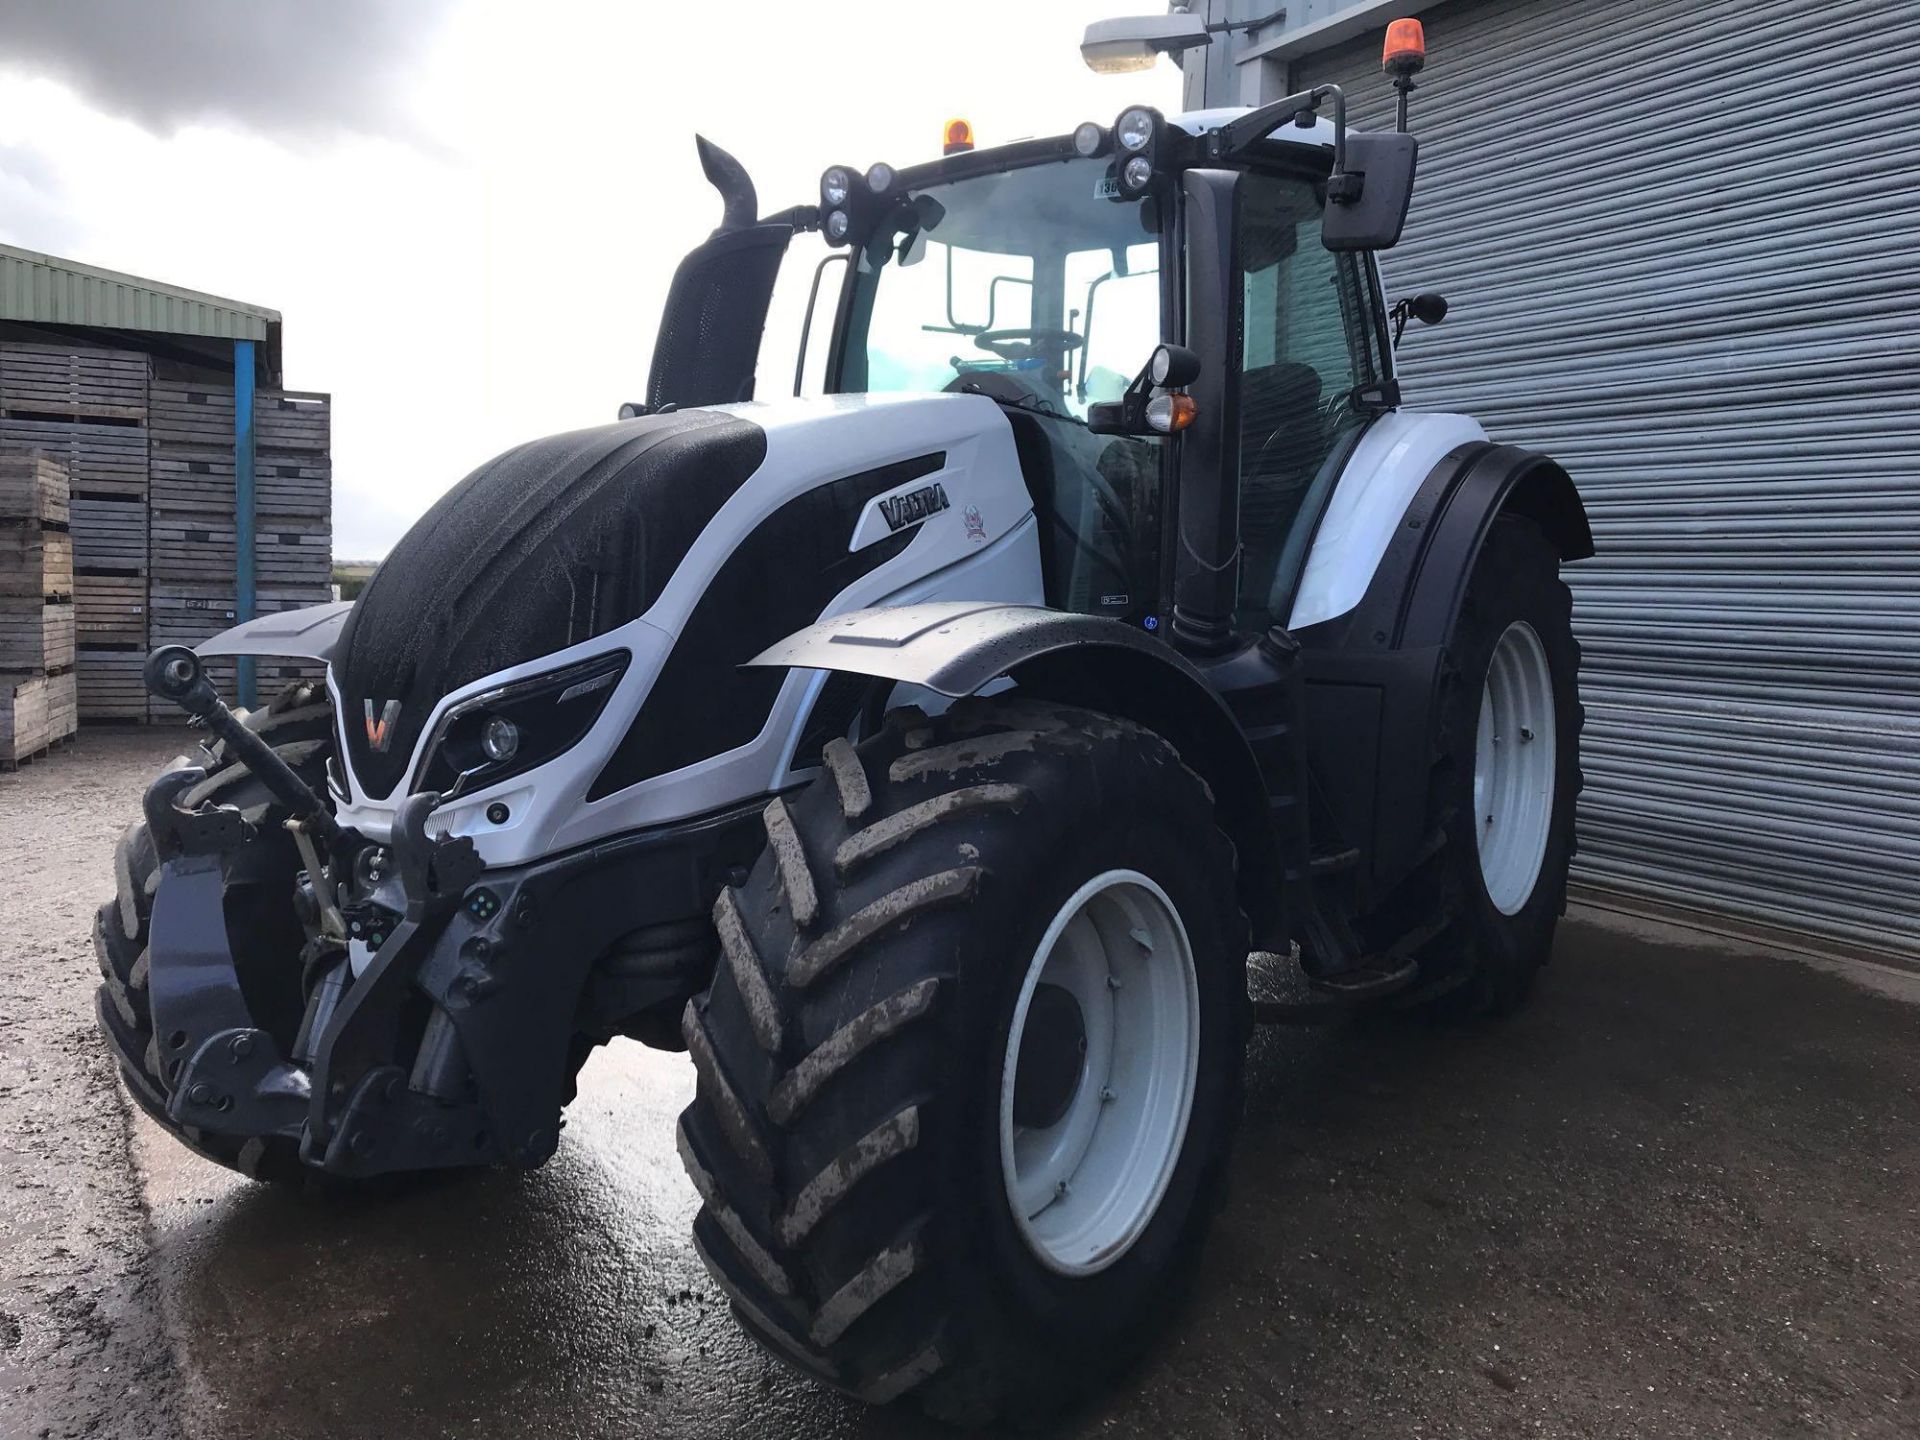 2015 Valtra T174 Versu 50kph tractor, powershift transmission, air suspension, 2 front and 4 rear sp - Image 2 of 15